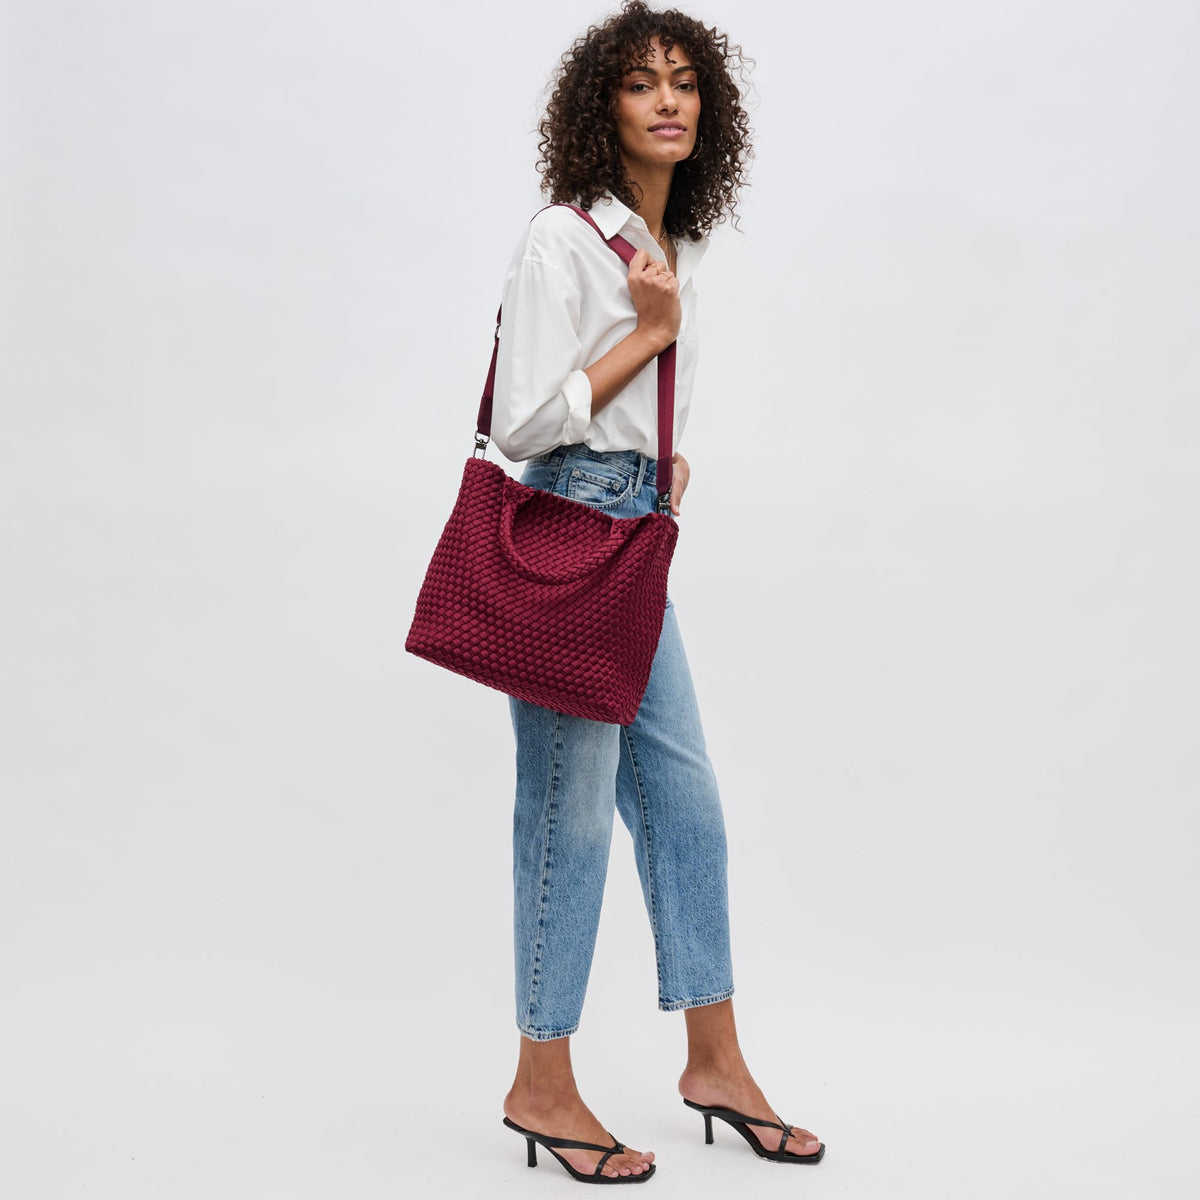 Woman wearing Wine Sol and Selene Sky's The Limit - Medium Tote 841764108850 View 4 | Wine